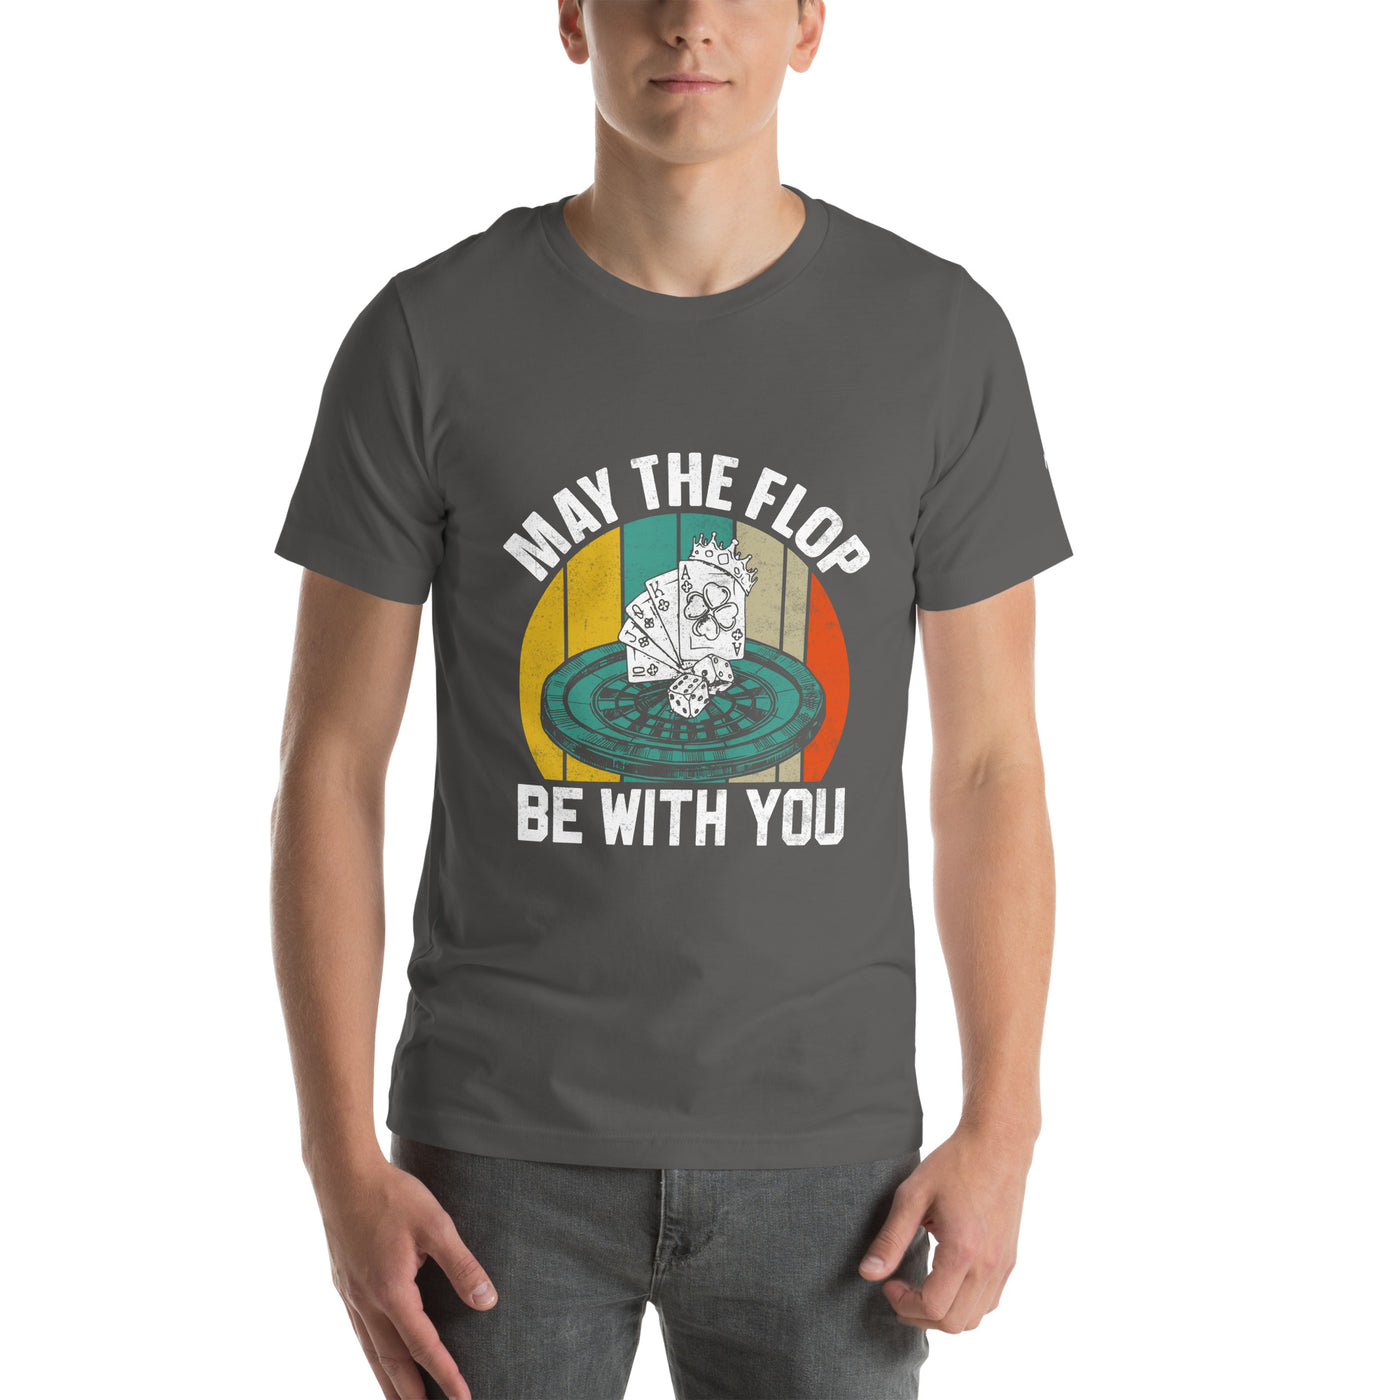 May the Flop be with you - Unisex t-shirt